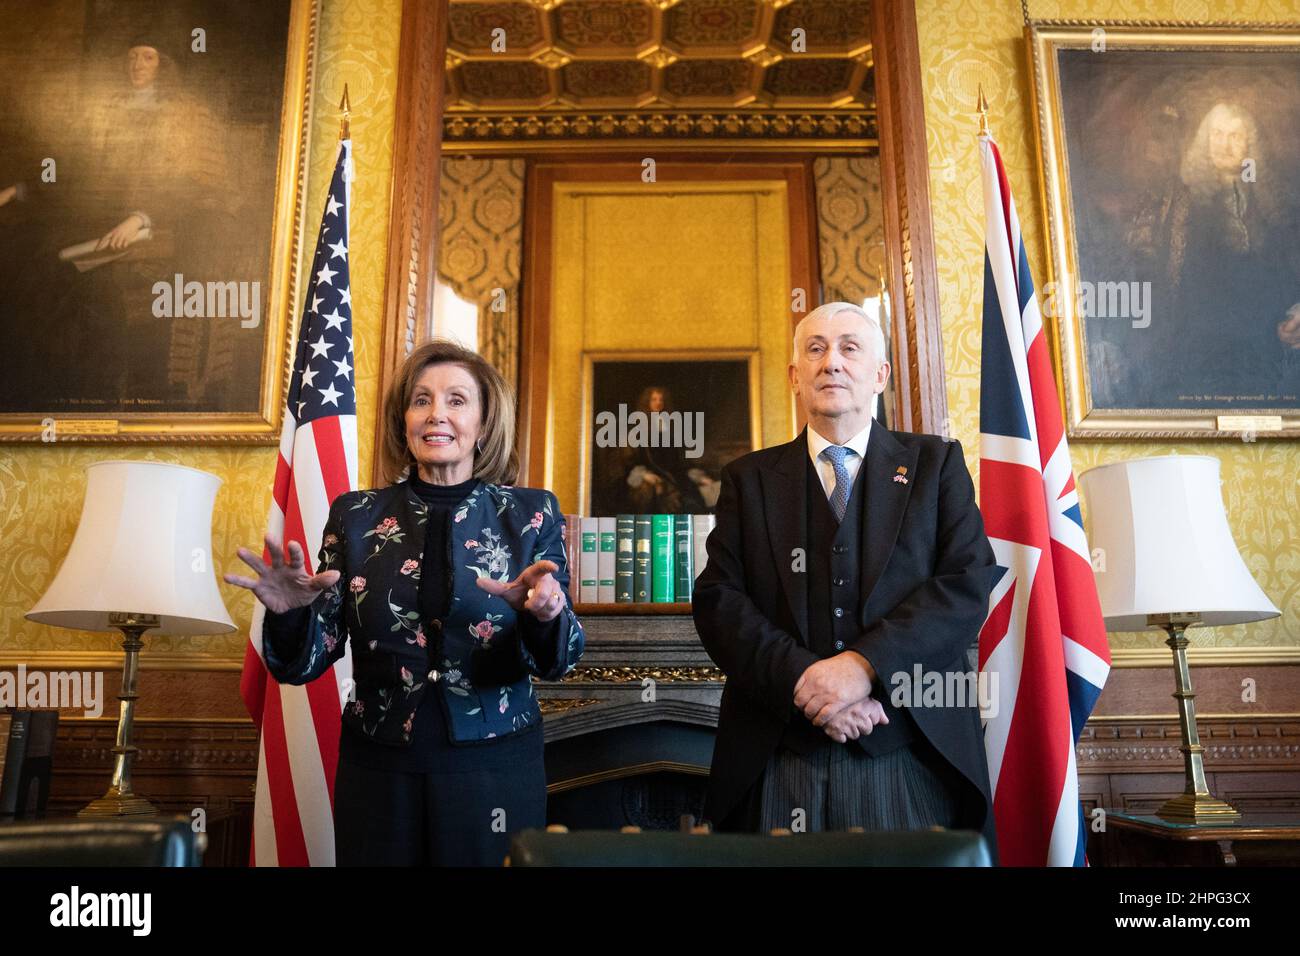 Speaker of the House of Commons Sir Lindsay Hoyle and Nancy Pelosi, Speaker of the House of Representatives in the United States answer questions from the media during her visit as his guest to the Houses of Parliament in Westminster, London. Picture date: Monday February 21, 2022. Stock Photo